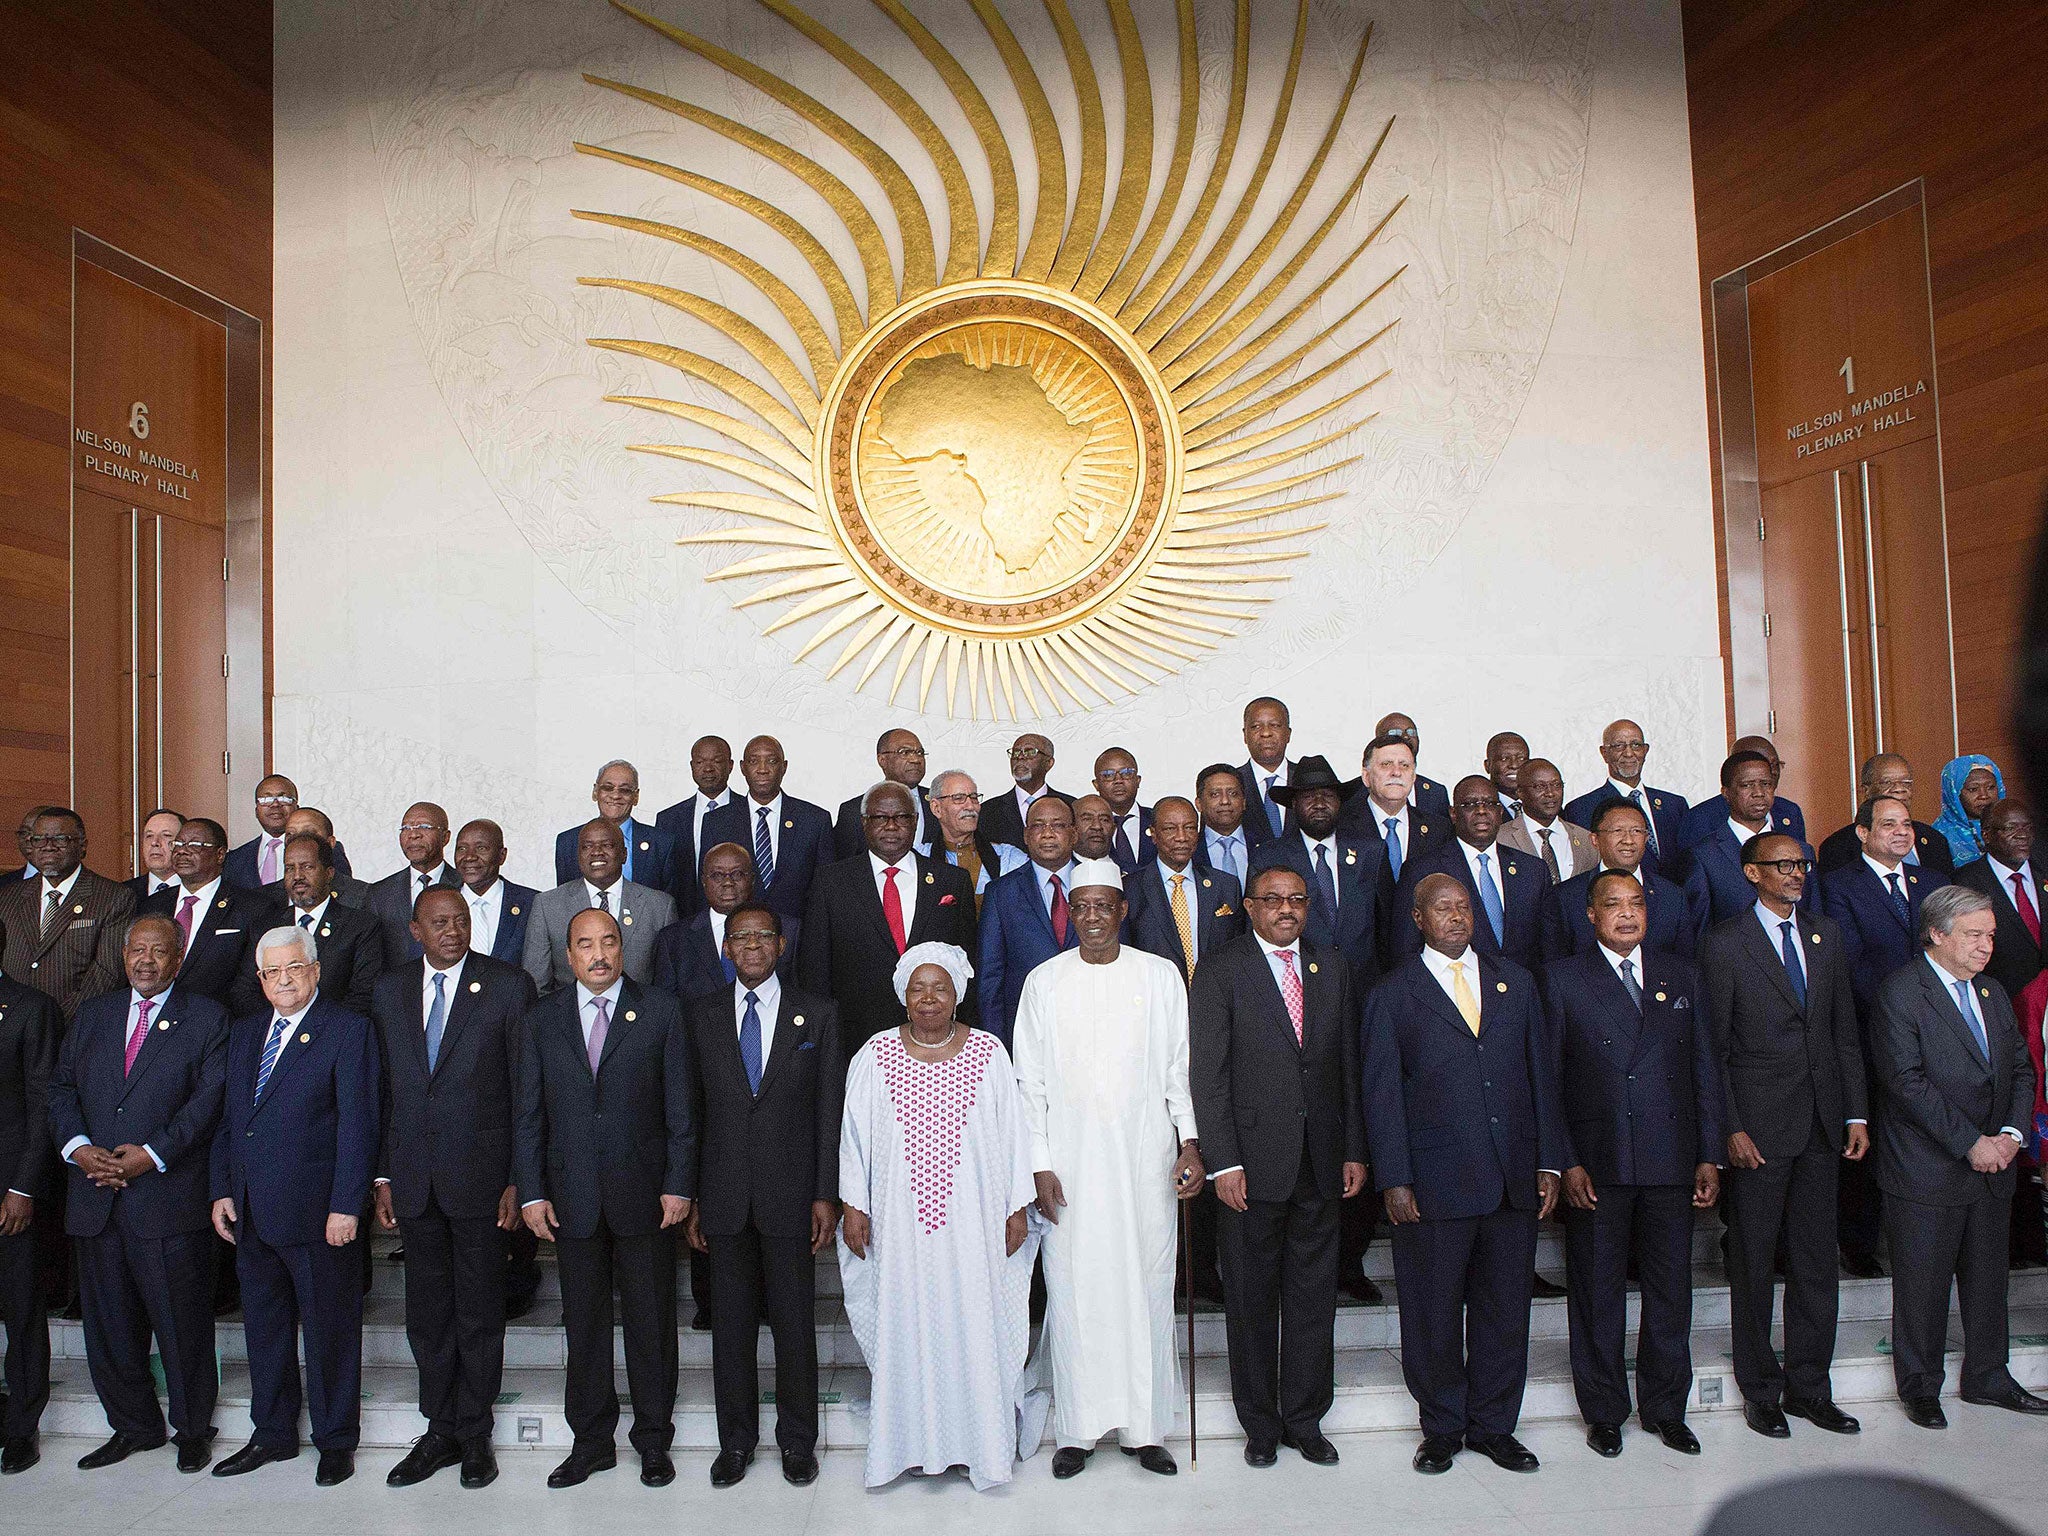 African Heads of State pose for a group photo ahead of the start of the 28th African Union summit in Addis Ababa on 30 January, 2017